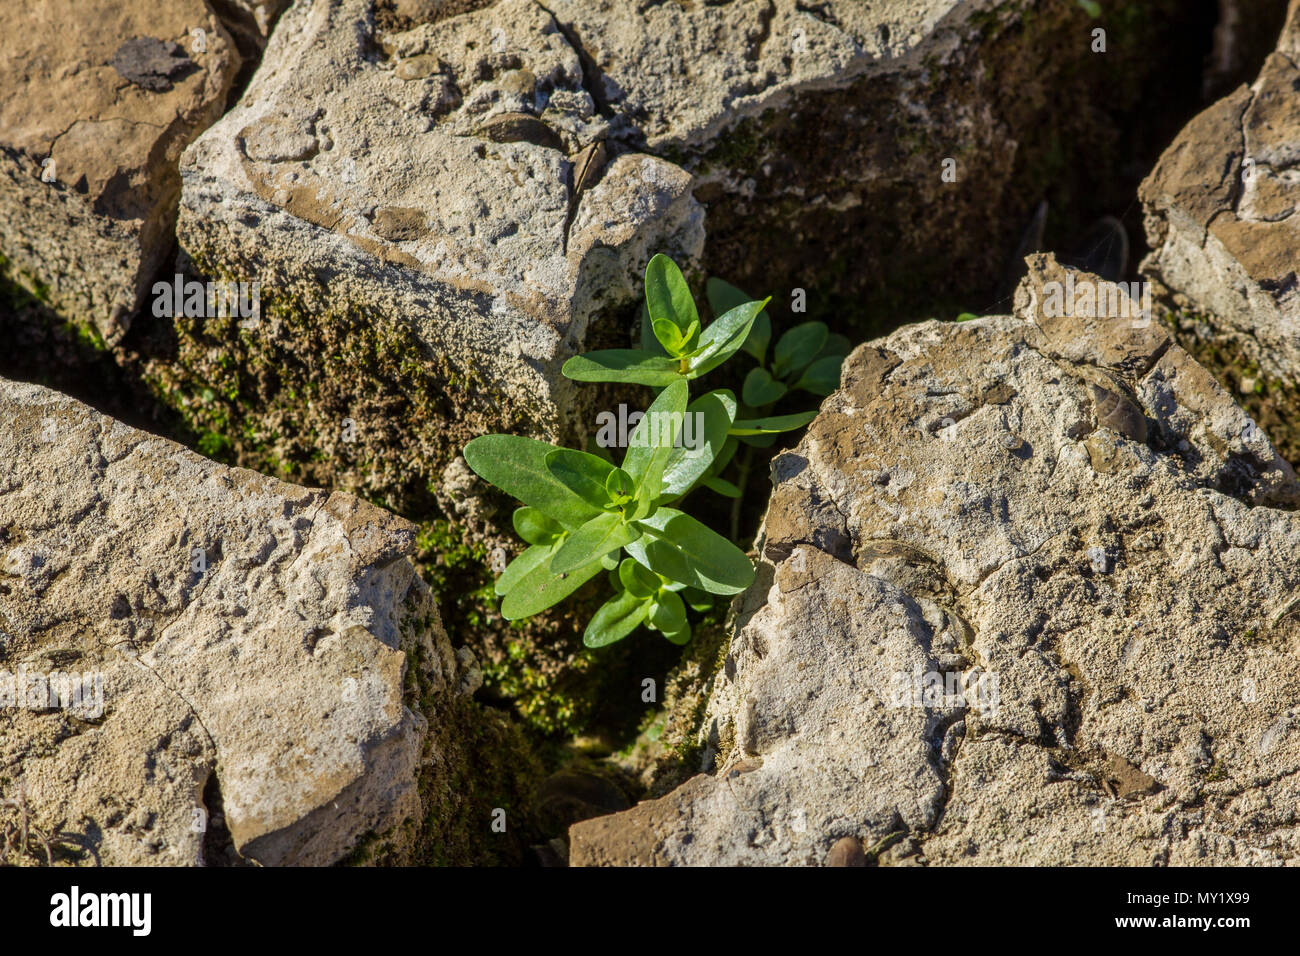 A green plant growing between cracks in a land cracked by drought, symbolizing the hope that should not be lost Stock Photo